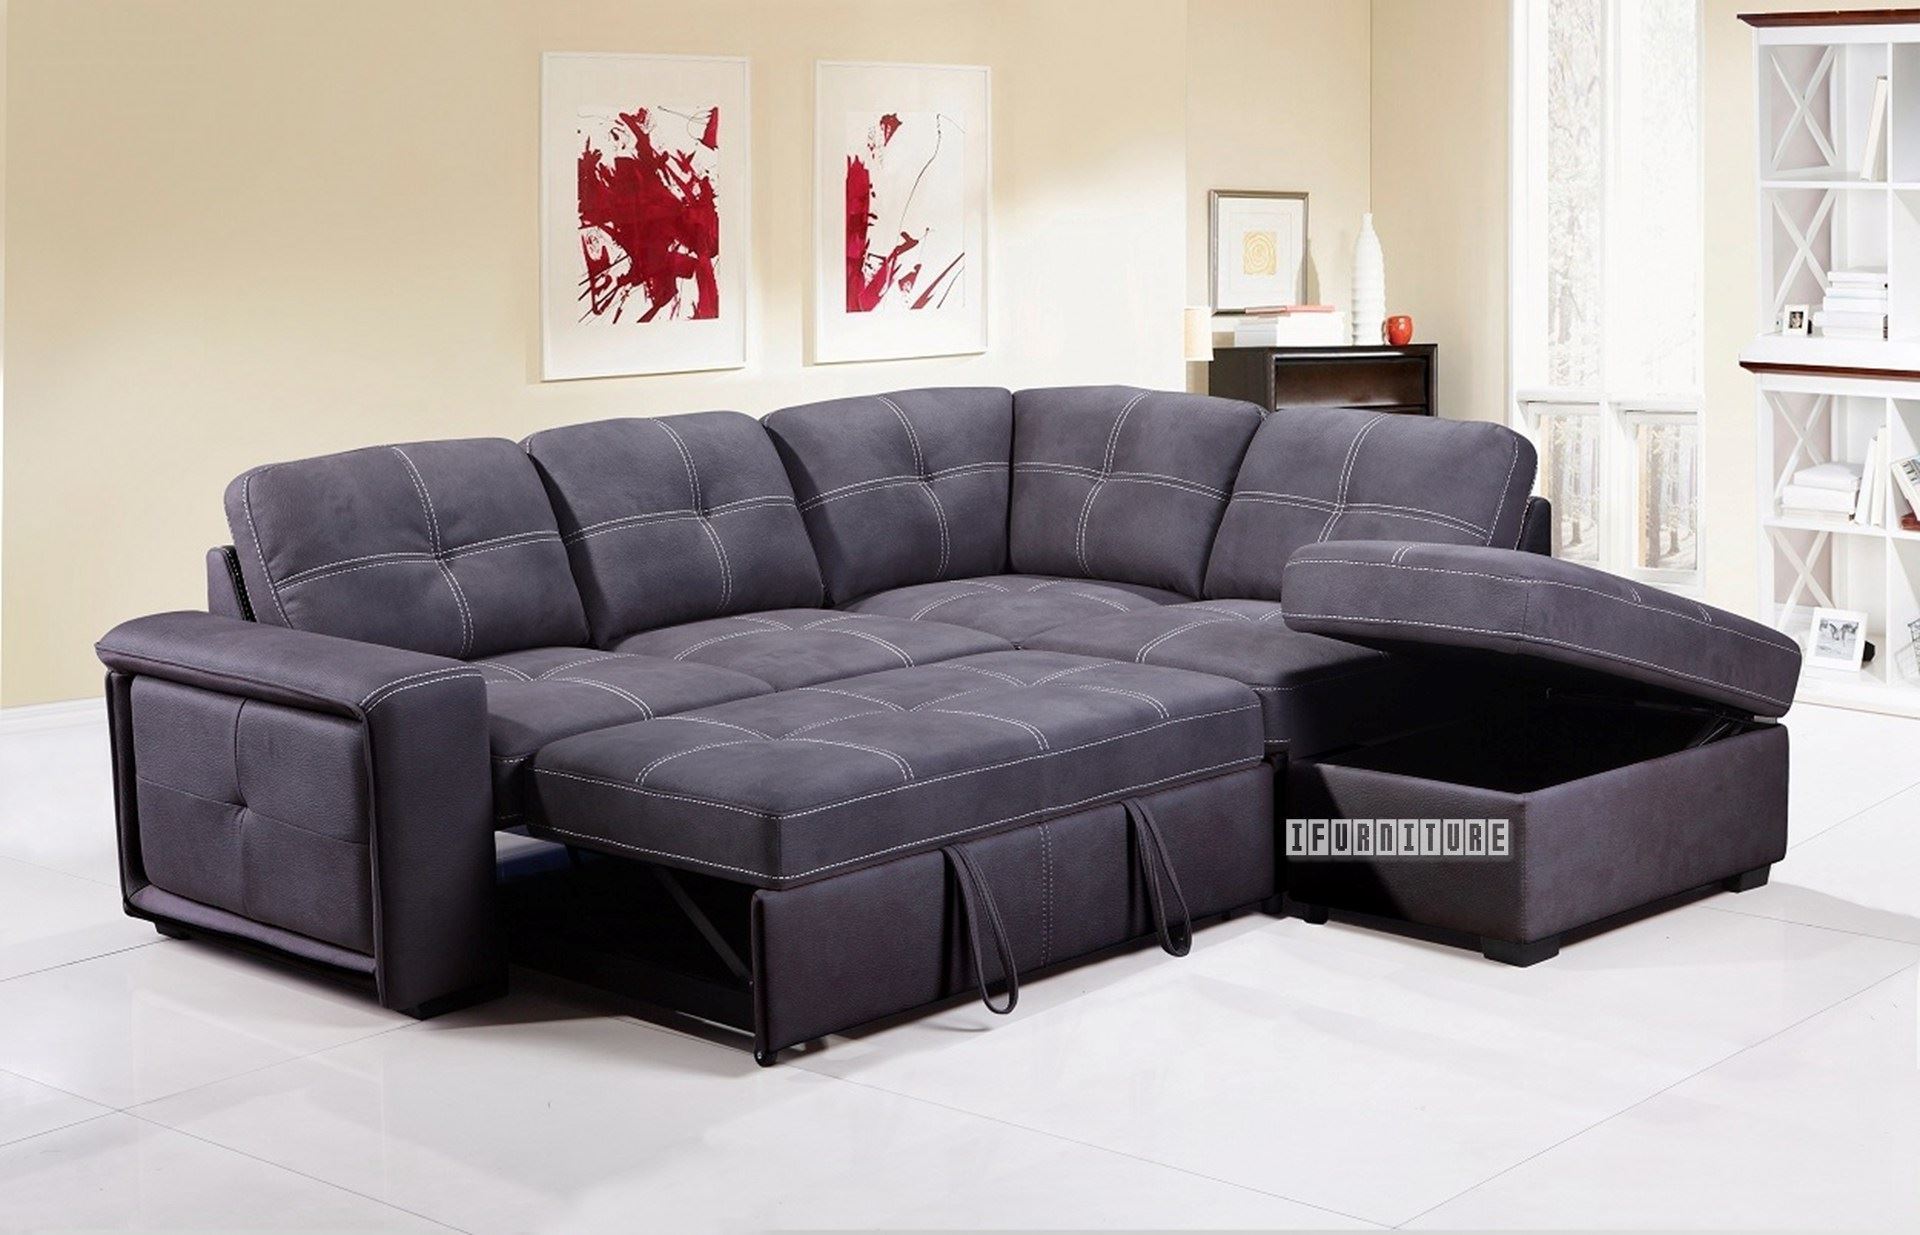 0031988 Bellini Sectional Sofa Bed With Storage Grey 